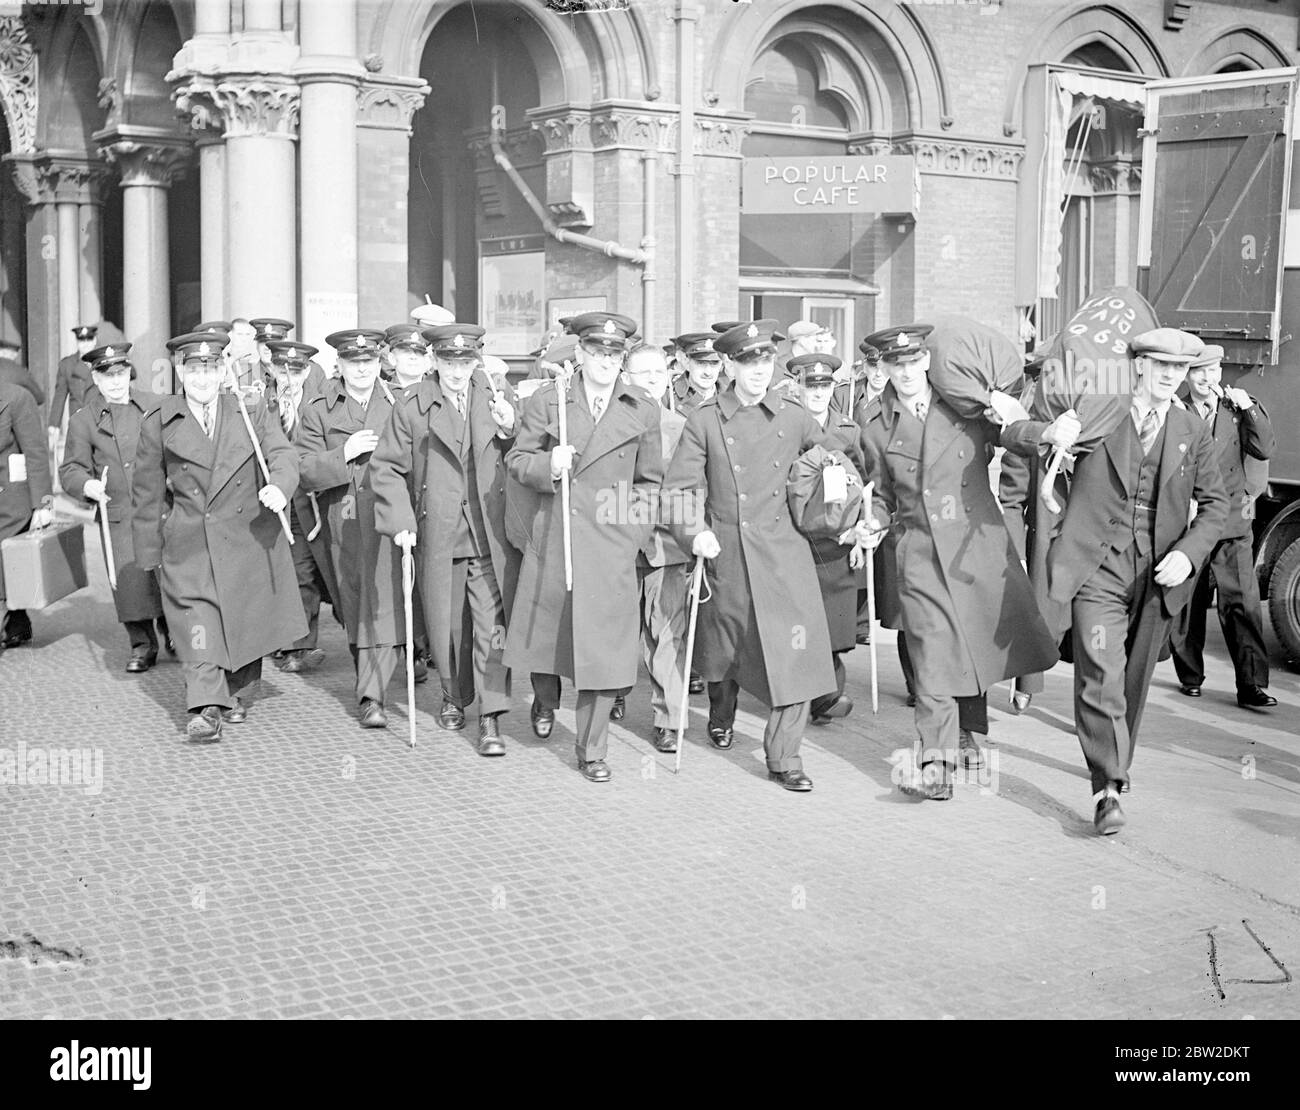 The British Legion police force, which has been waiting in two ships in the Thames estuary ready to go to Czechoslovakia for plebiscite duty, arrived at St Pancras station from Tilbury in special trains on the way to their homes. The force of 1200 men is being disbanded following the decision of the International Commission in Berlin that plebiscite will not be necessary. Photo shows: Plebiscite police marching away from St Pancras station. 15 October 1938 Stock Photo